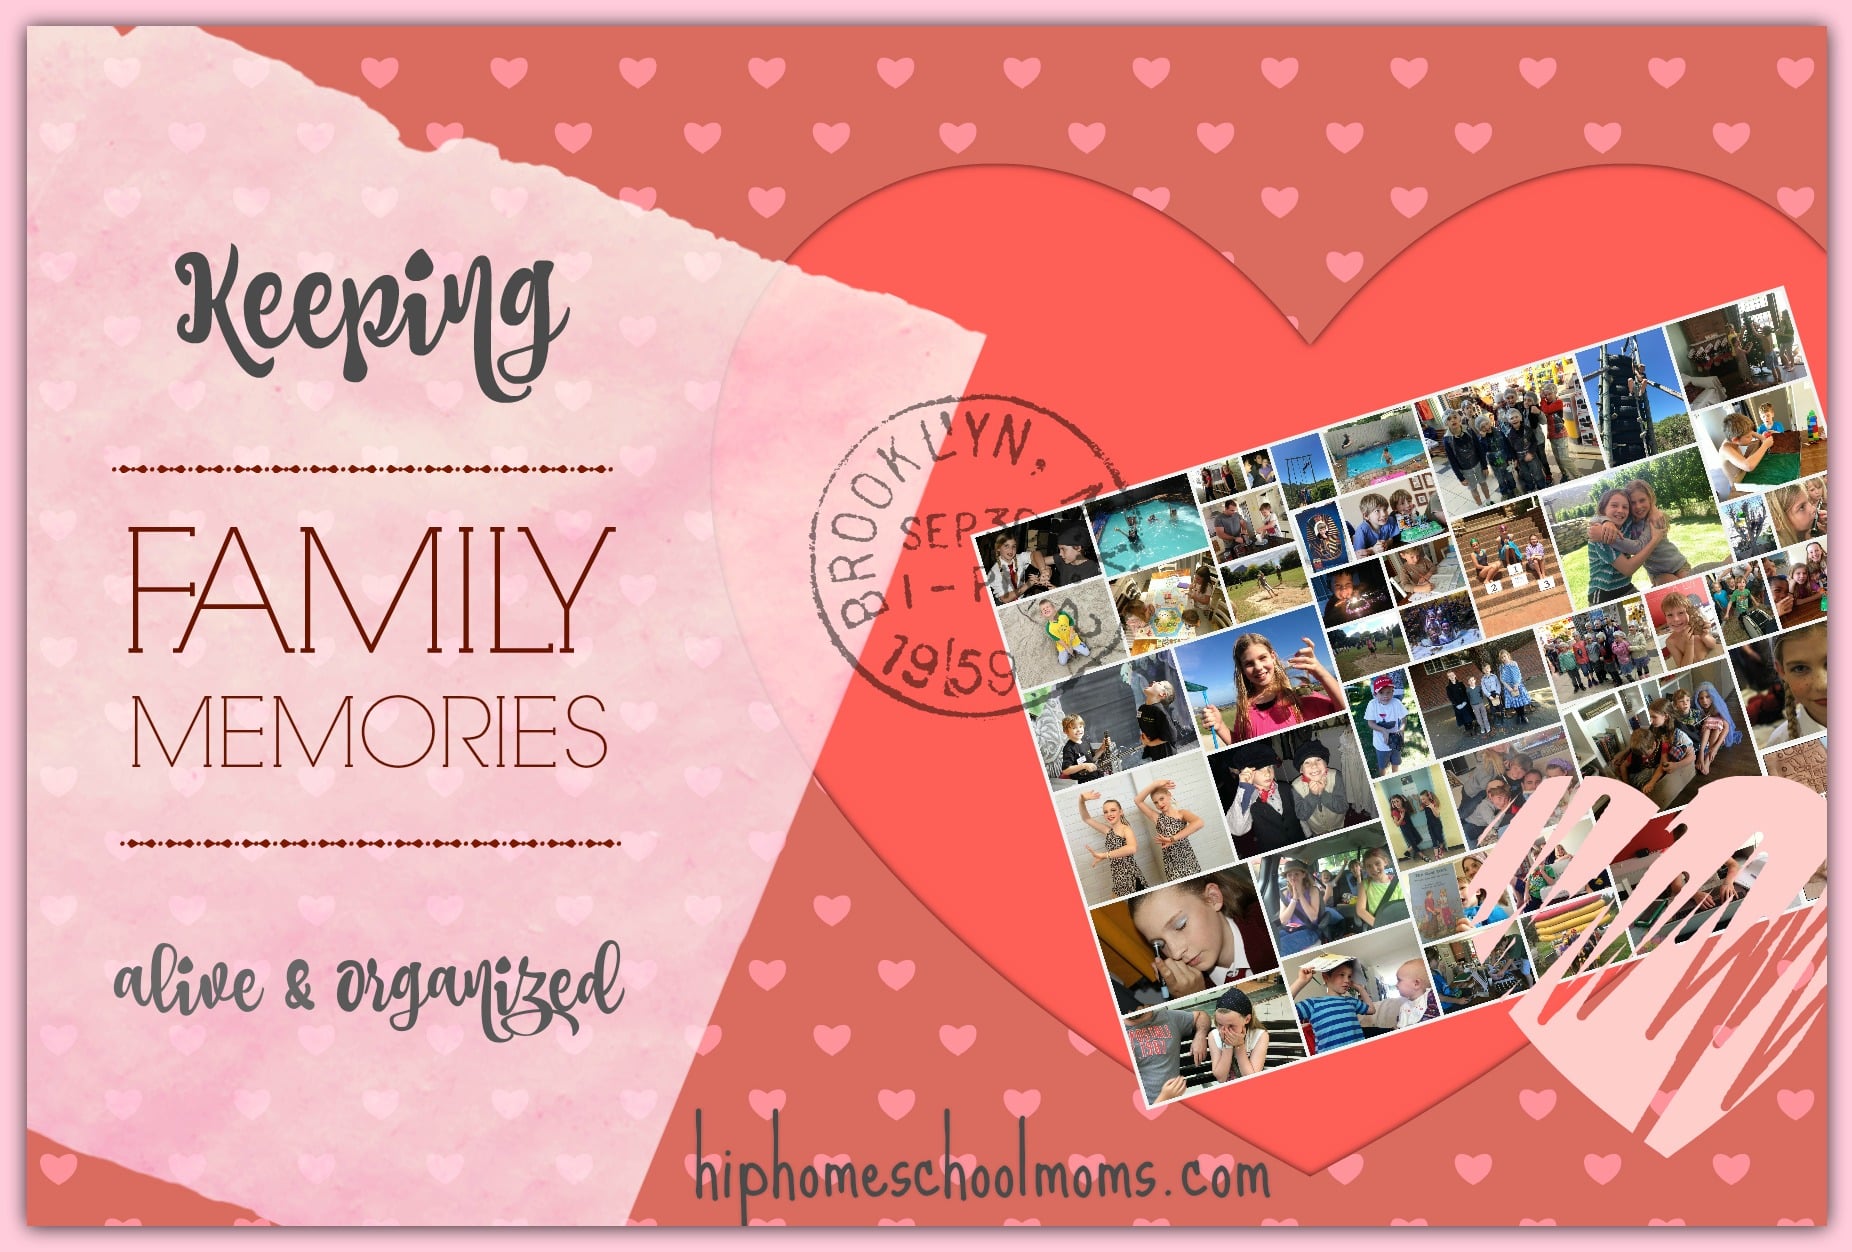 Keeping Family Memories Alive and Organized